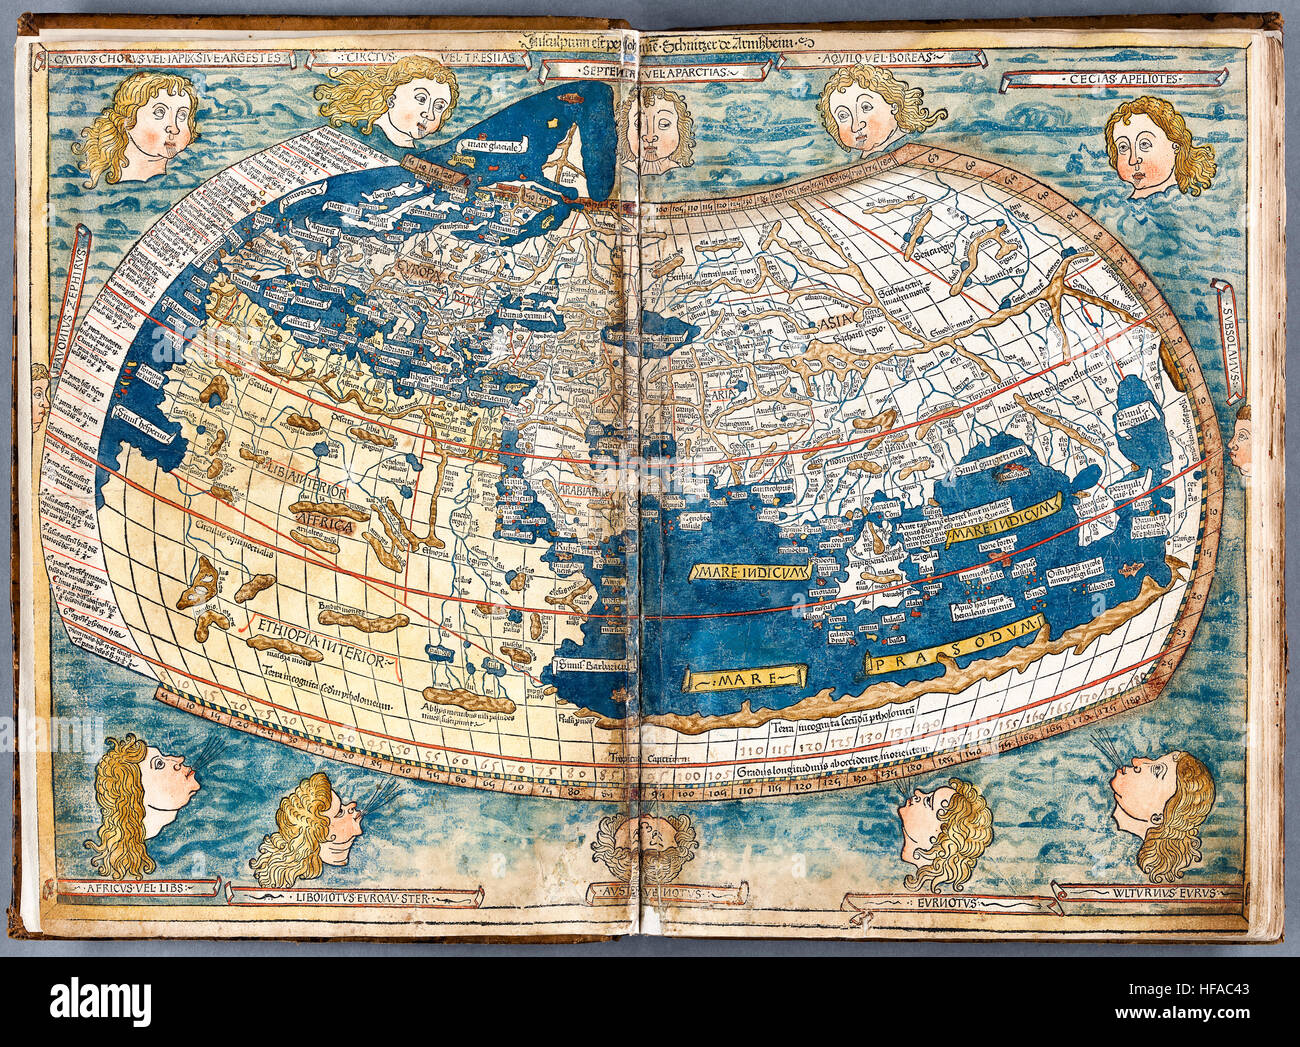 Claudius Ptolemy (90-168AD) world map in spherical projection circa 150AD by Nicolaus Germanus (c. 1420 – c. 1490) edition of Ptolemy's Cosmographia published in 1482. See description for more information. Stock Photo